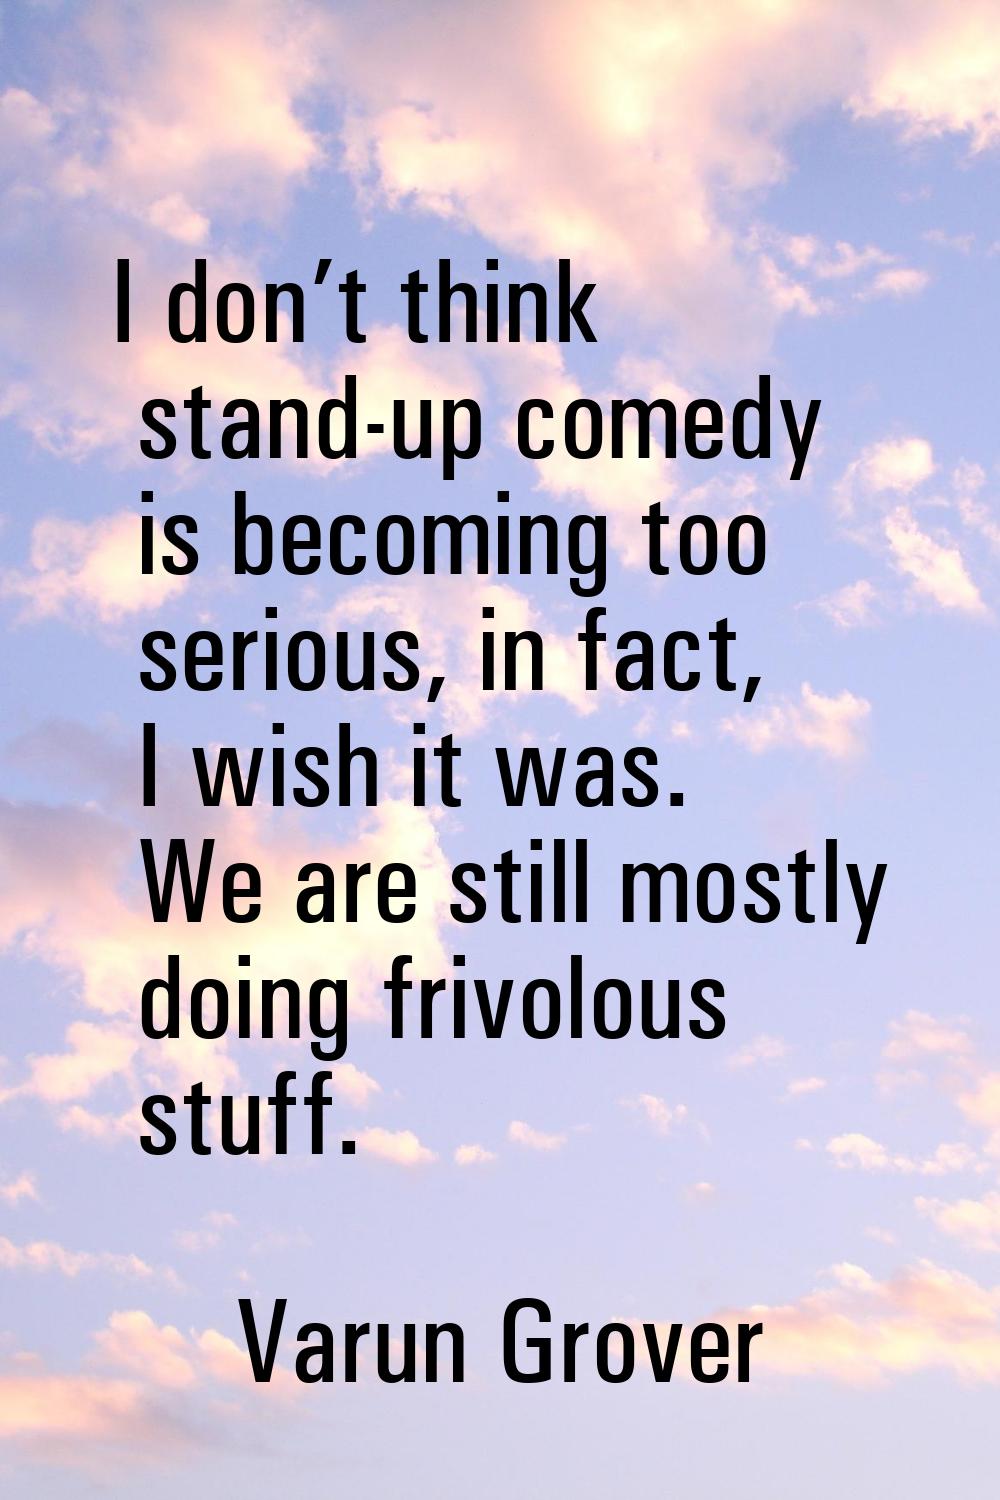 I don’t think stand-up comedy is becoming too serious, in fact, I wish it was. We are still mostly 